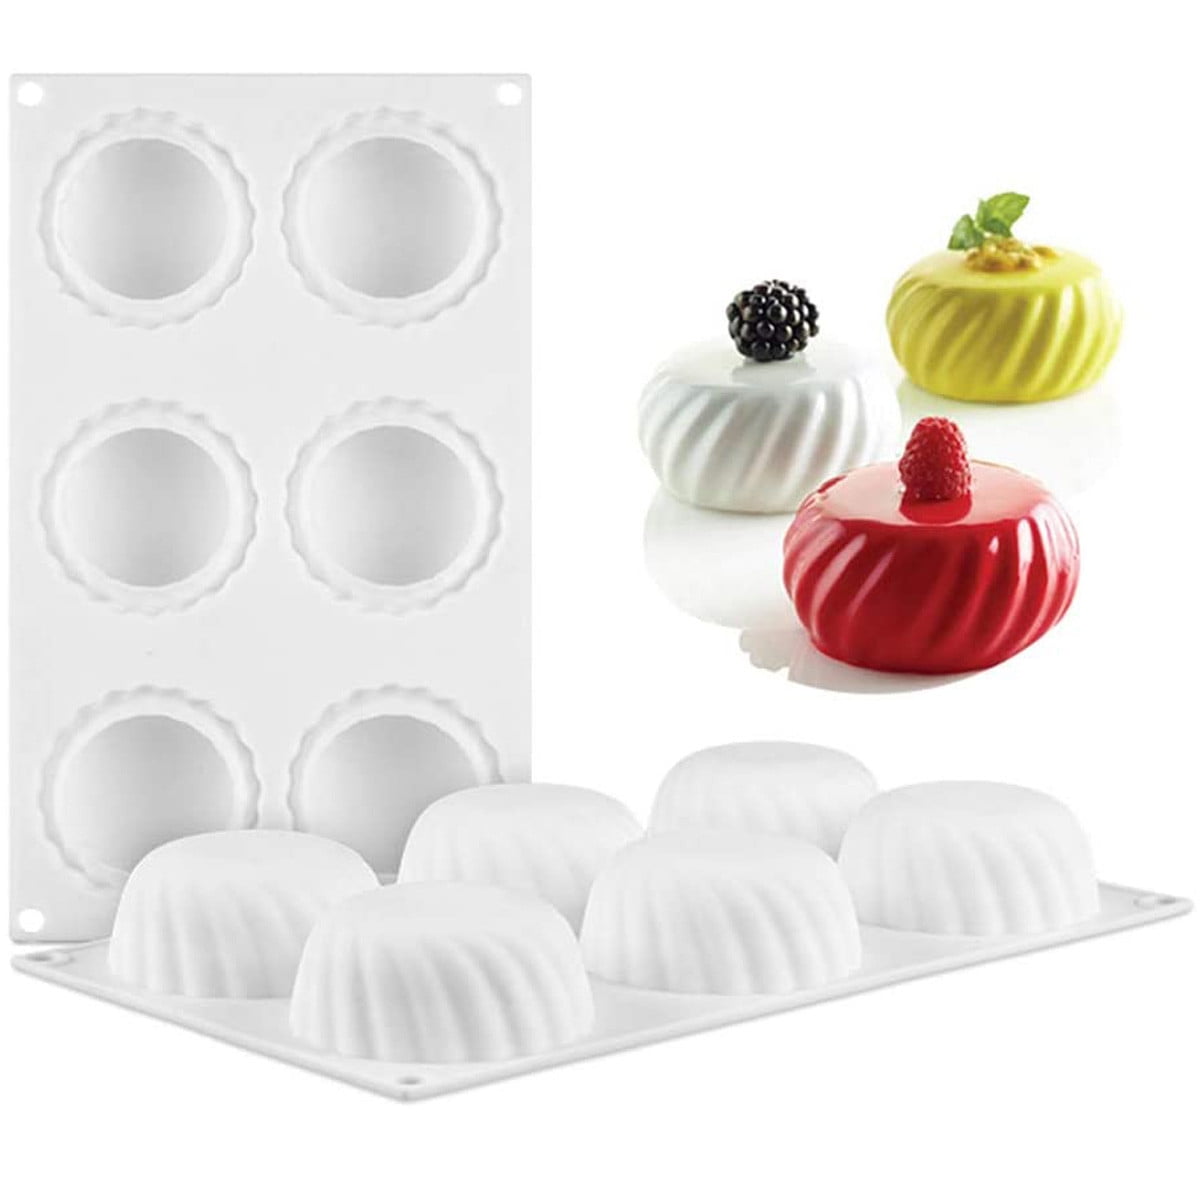 Big Swirl Ring Silicone Chocolate Cookie Baking Mould Jelly Fondant Muffin Mold